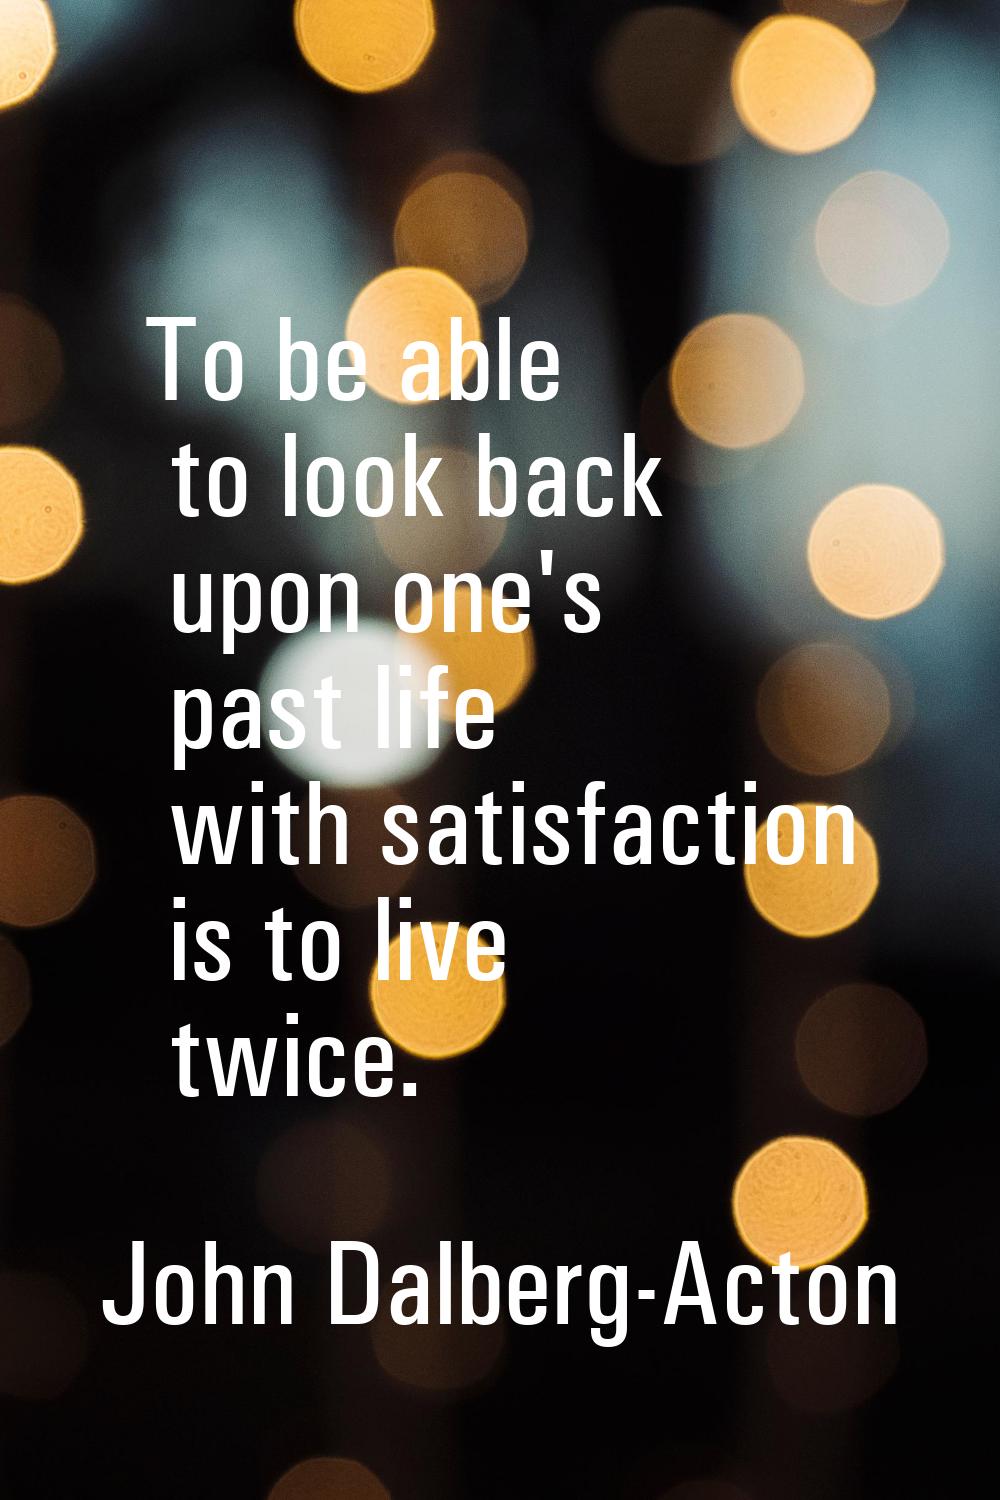 To be able to look back upon one's past life with satisfaction is to live twice.